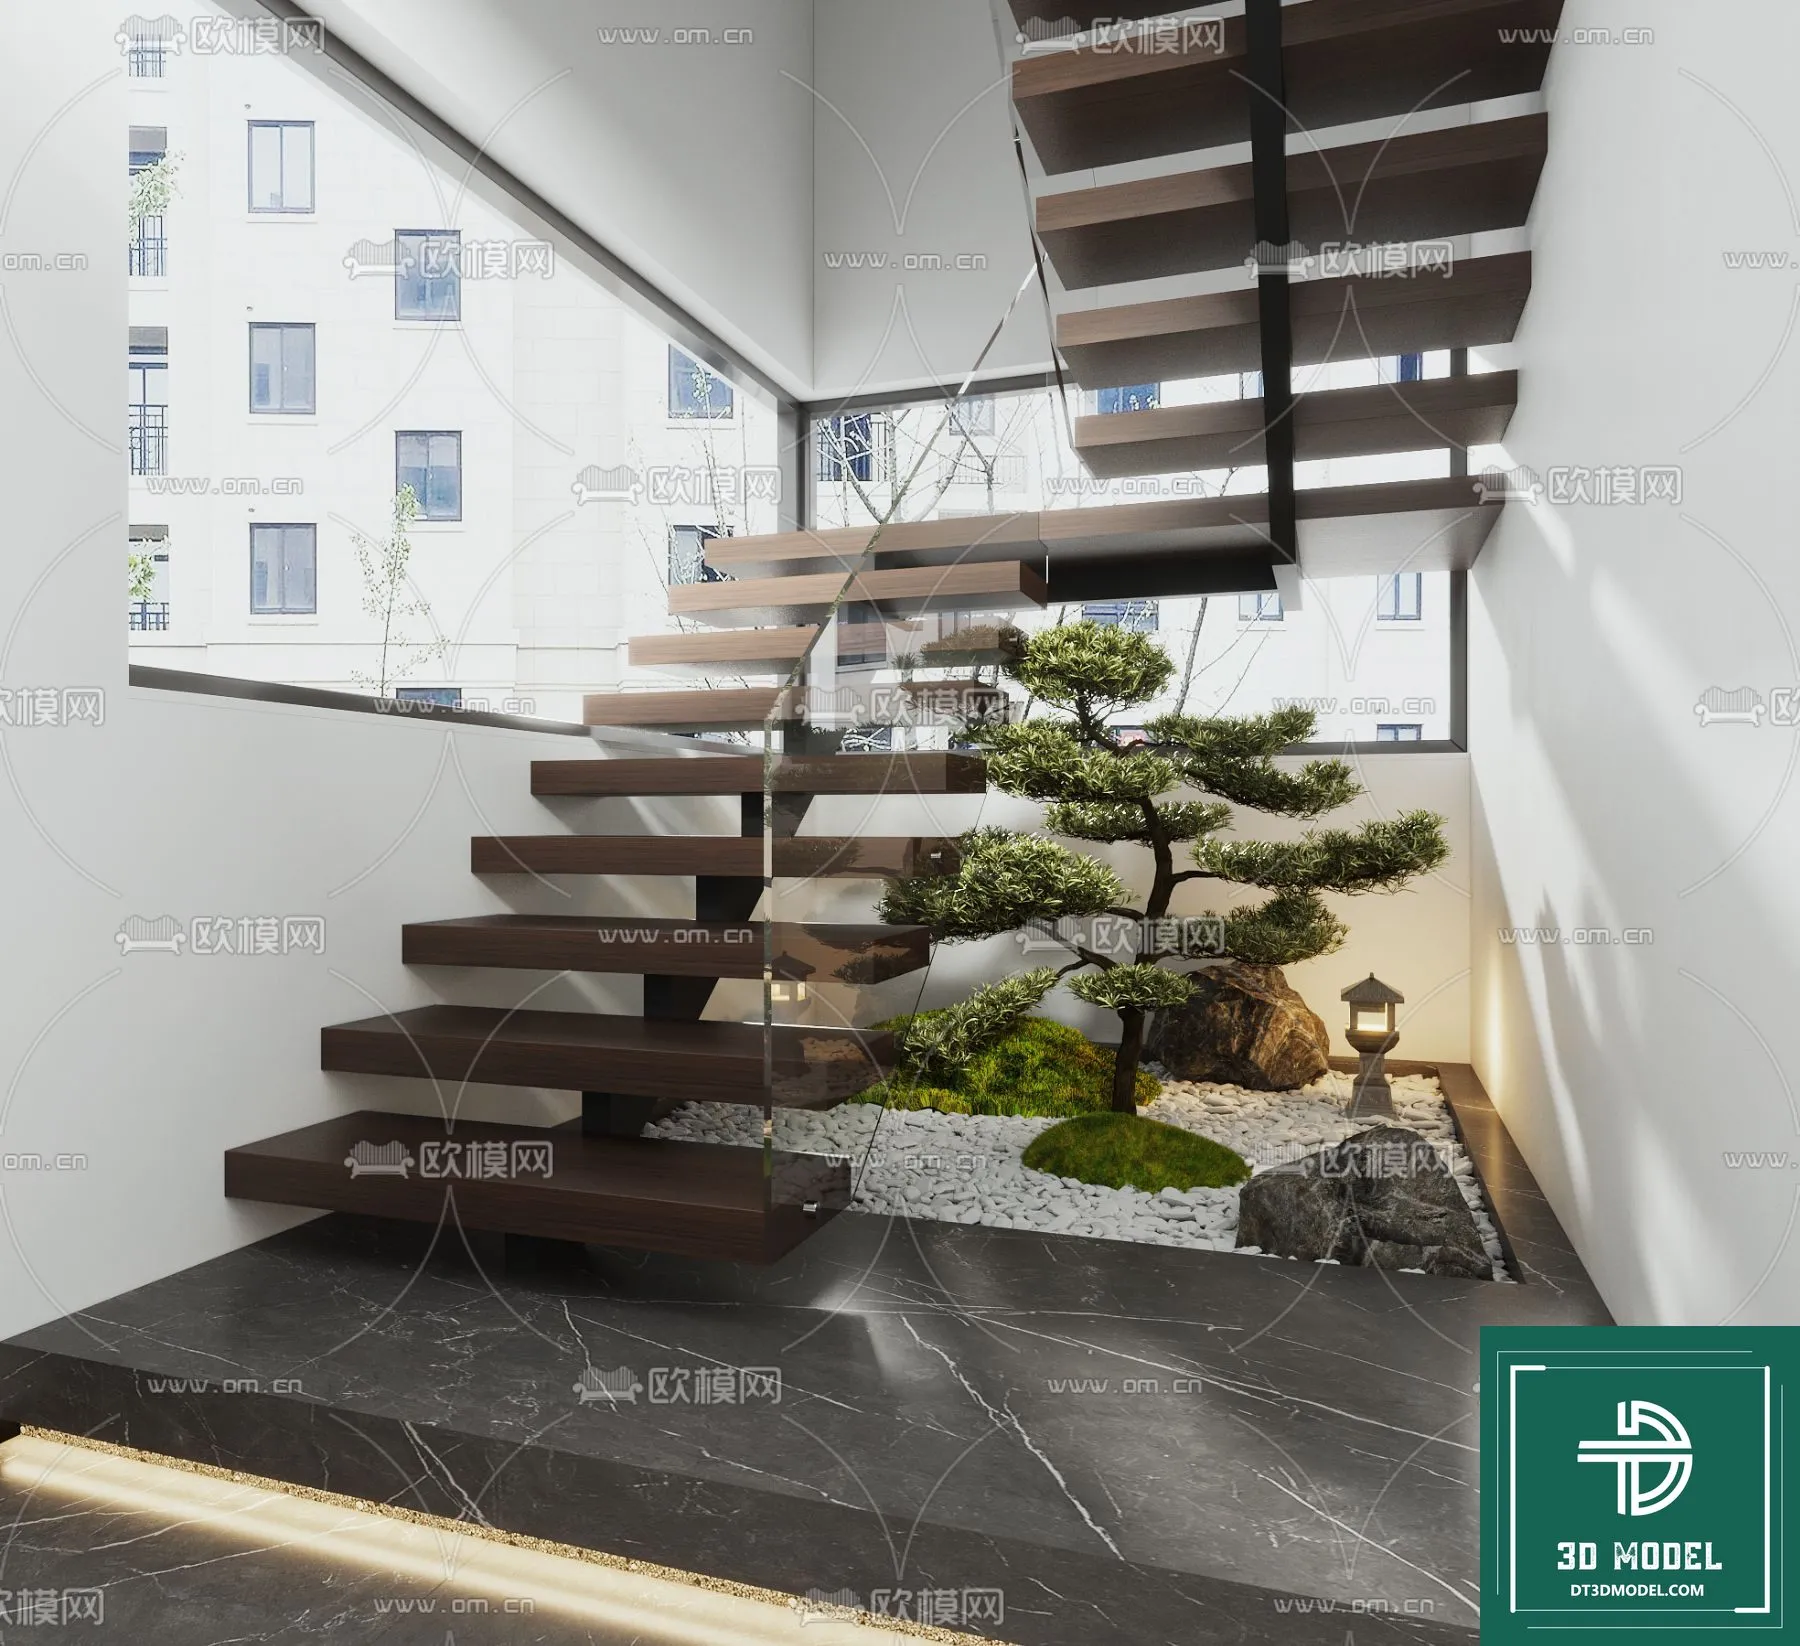 STAIR – 3DS MAX MODELS – 039 – PRO